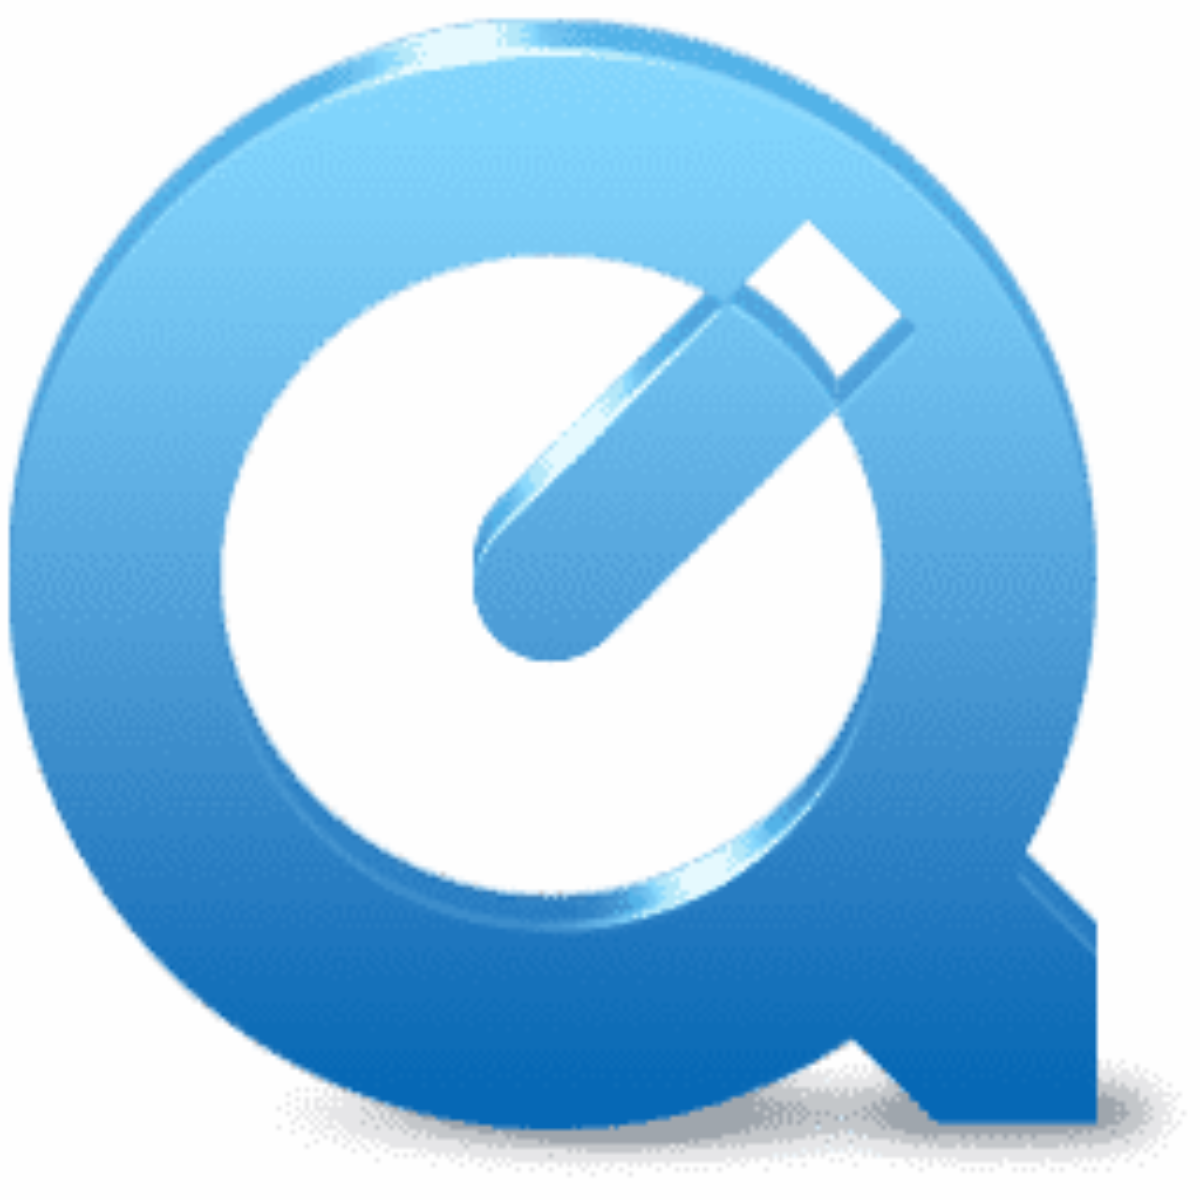 quicktime for mac windows